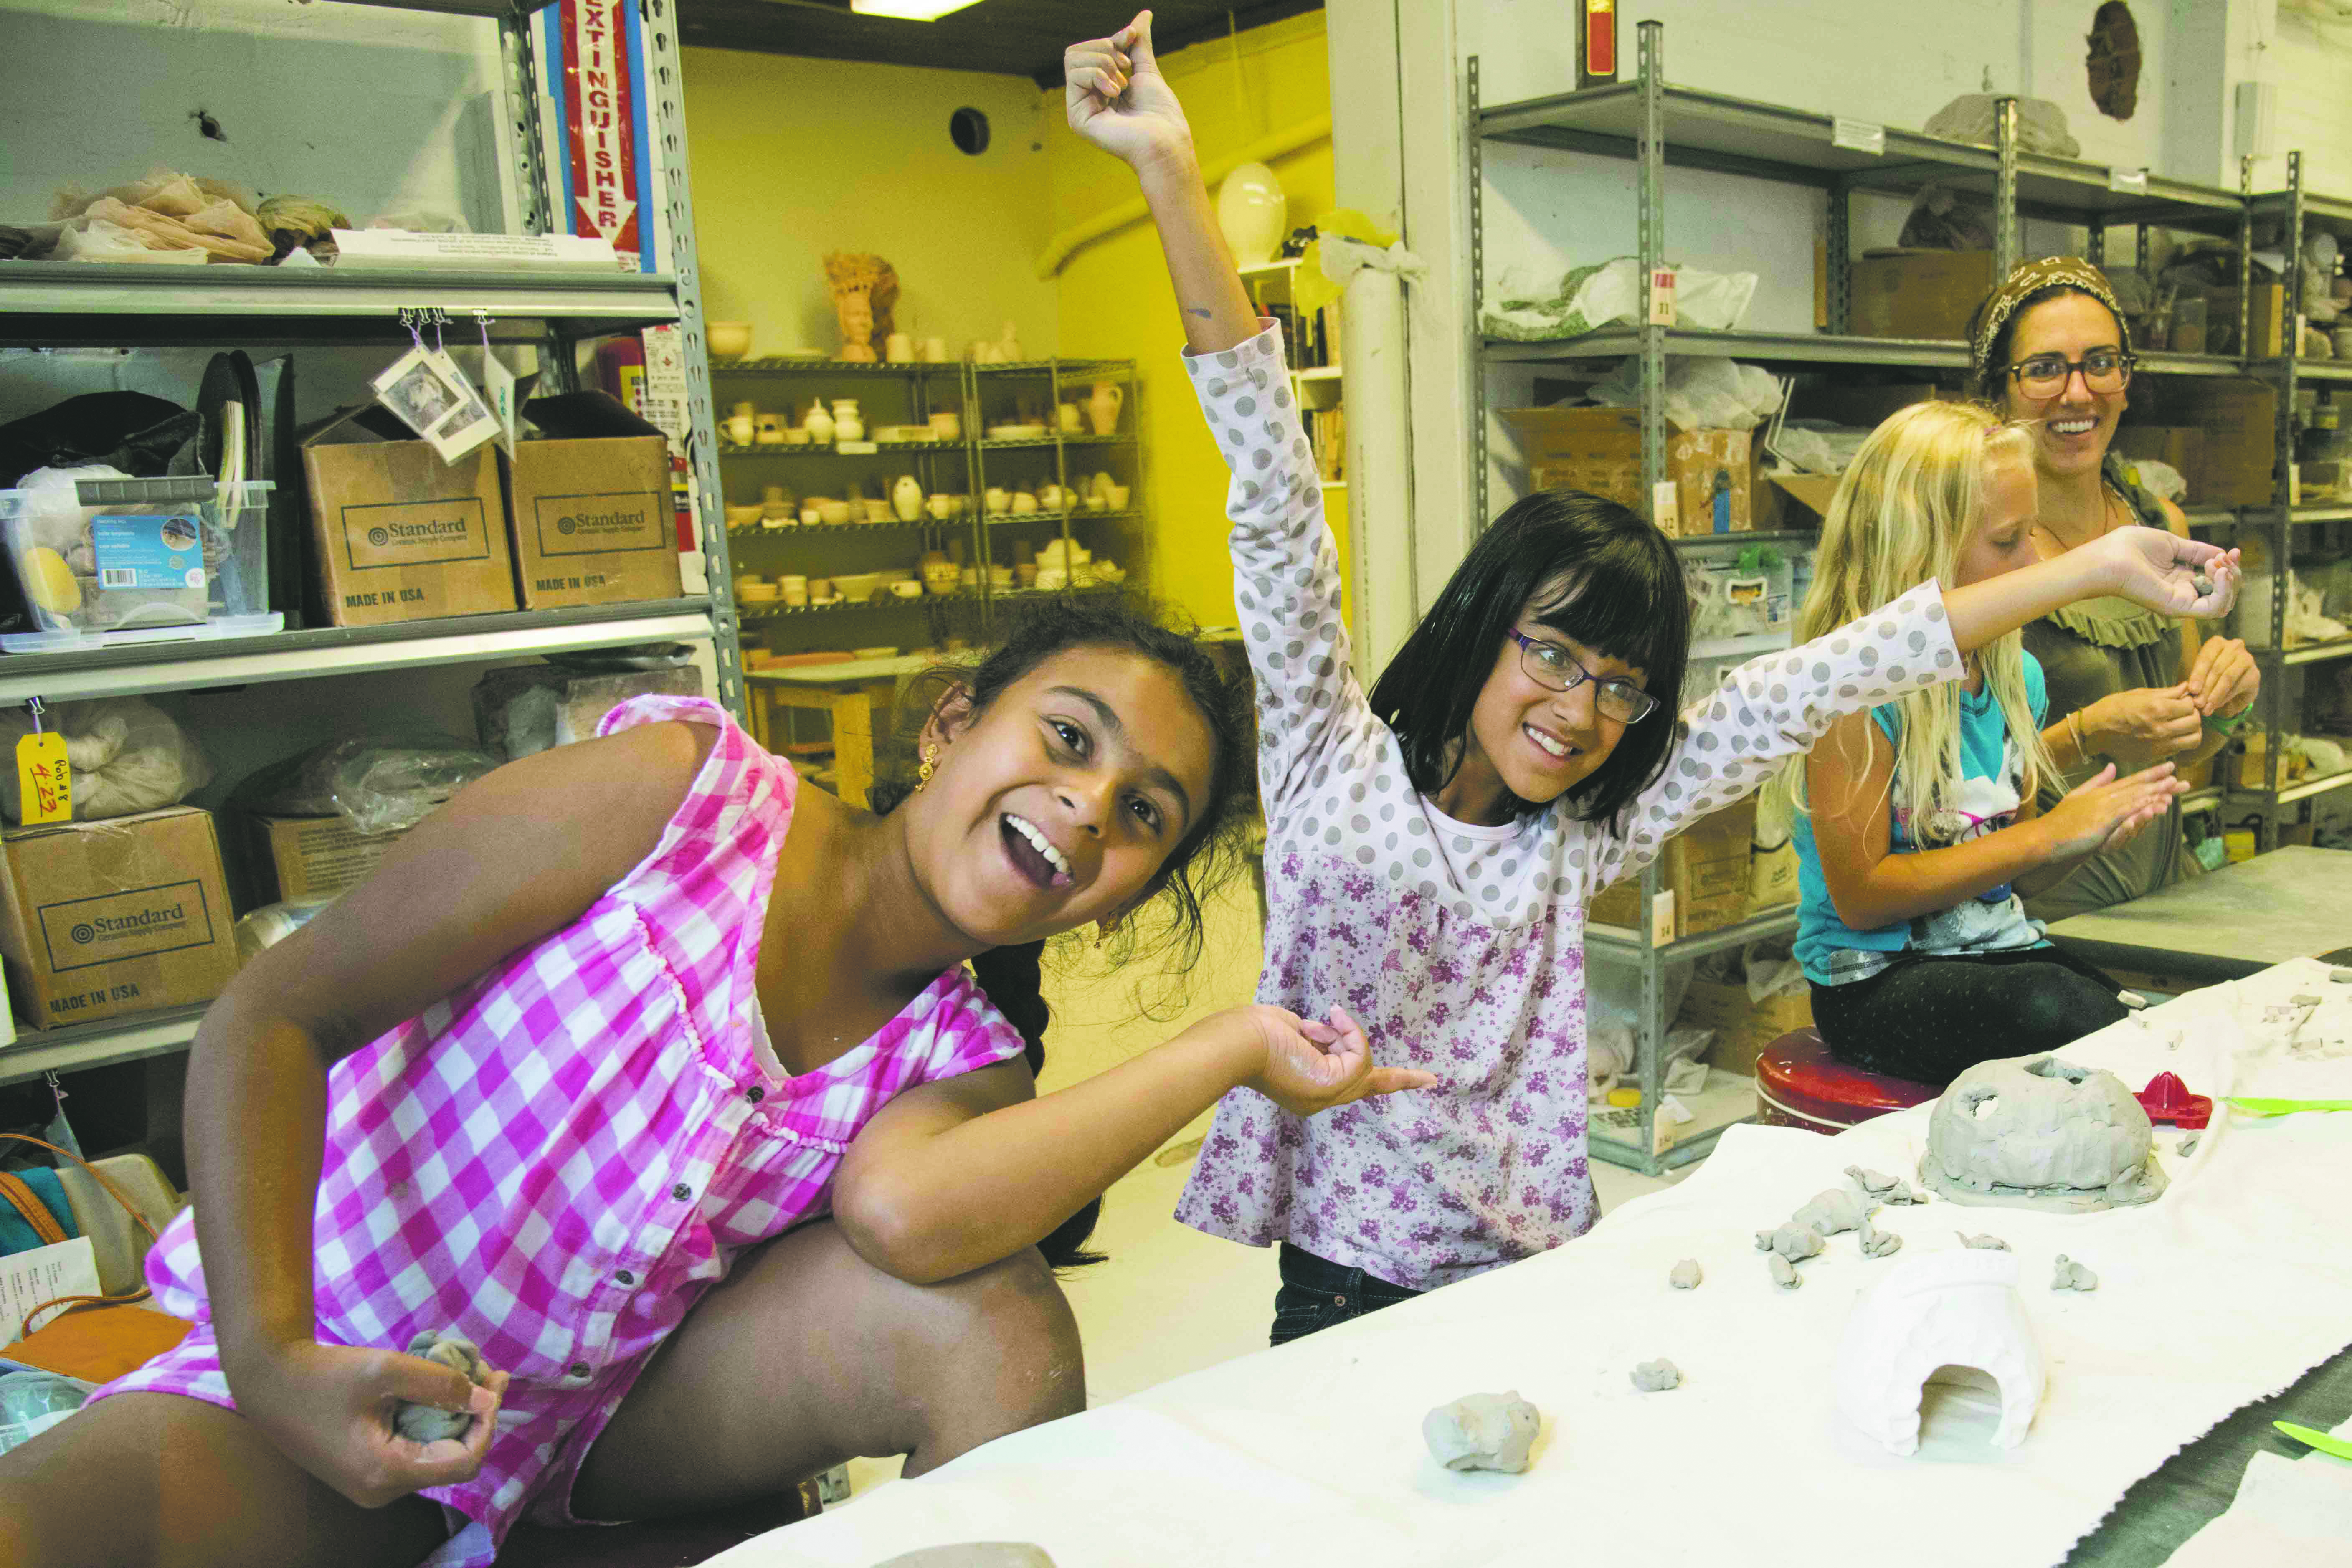 Camp students ham it up for the camera in the Ceramics studio